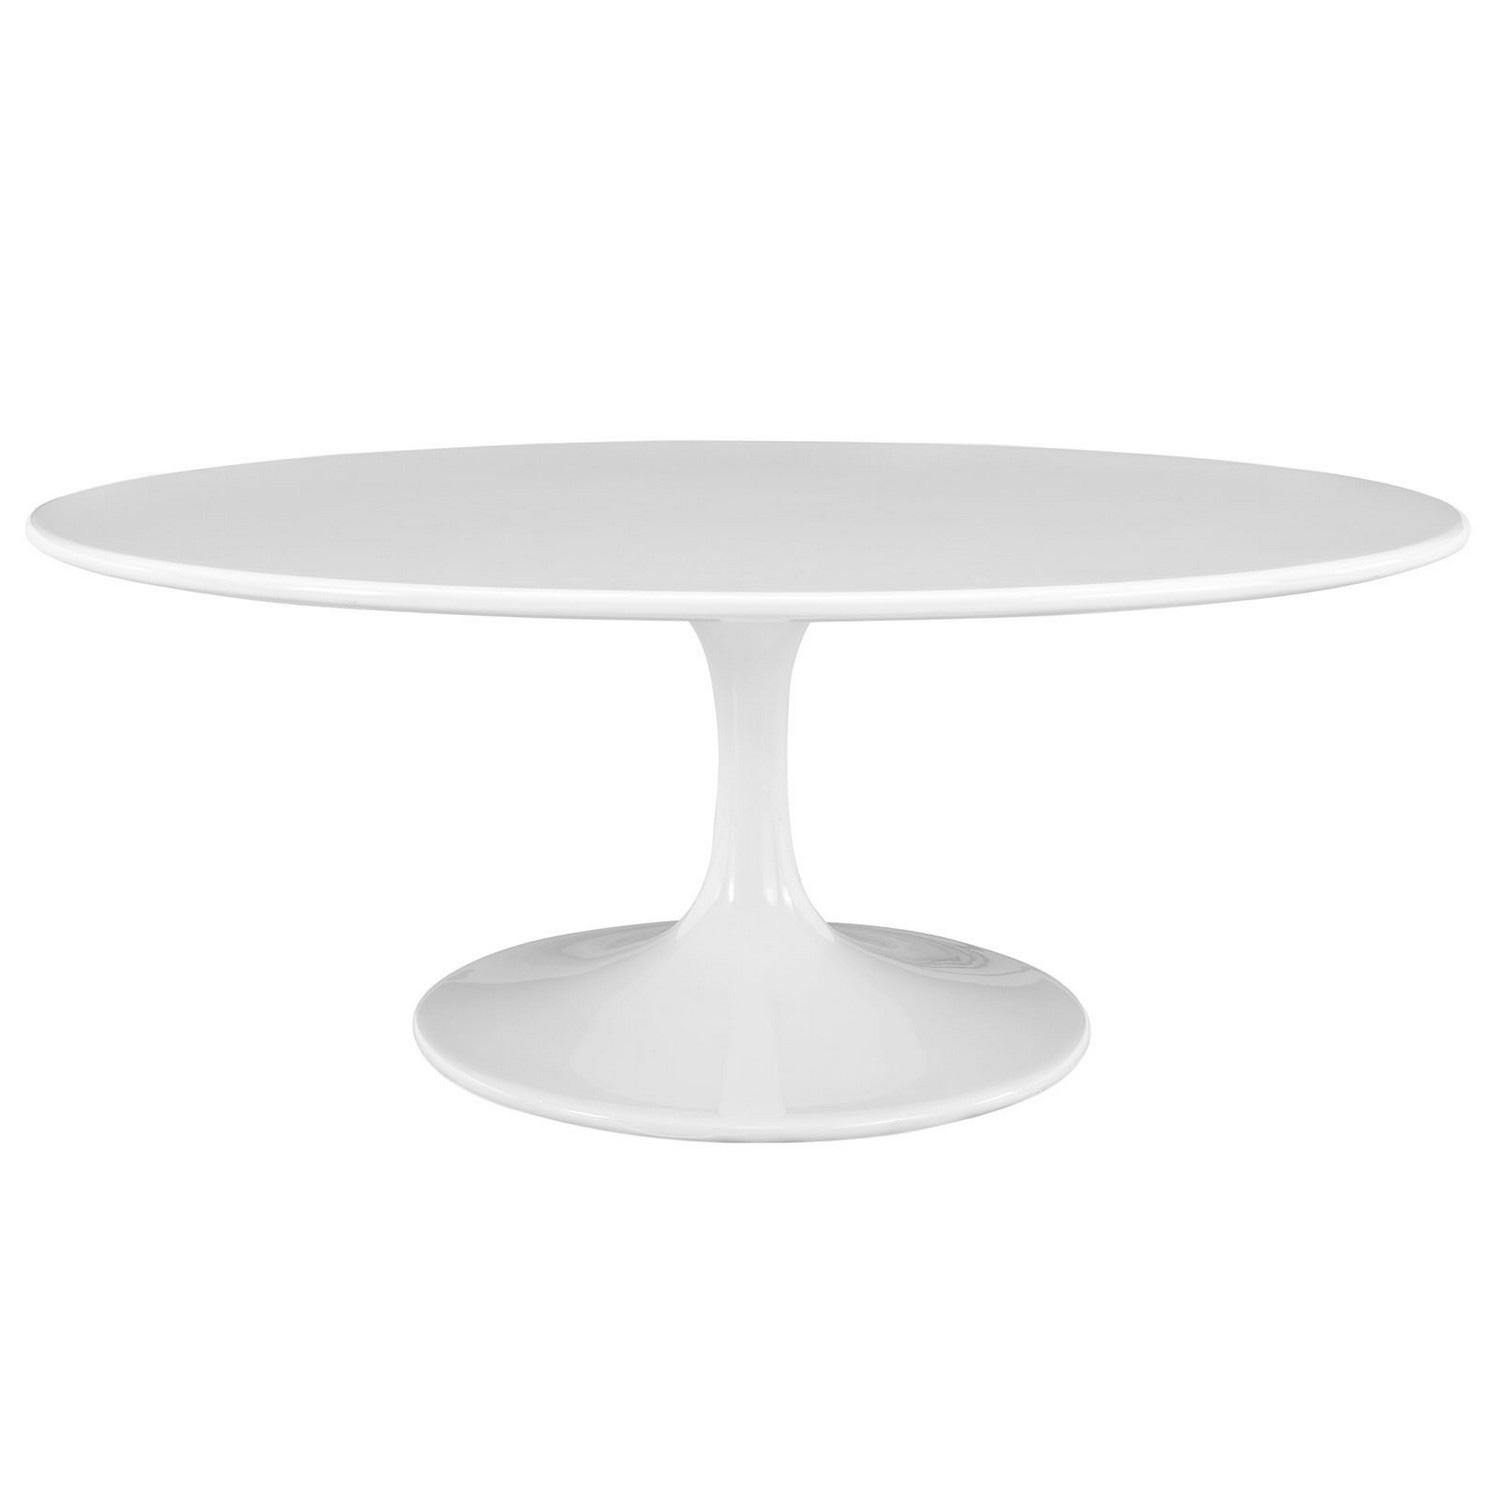 Modway Lippa 42 Oval-Shaped Wood Top Coffee Table - White